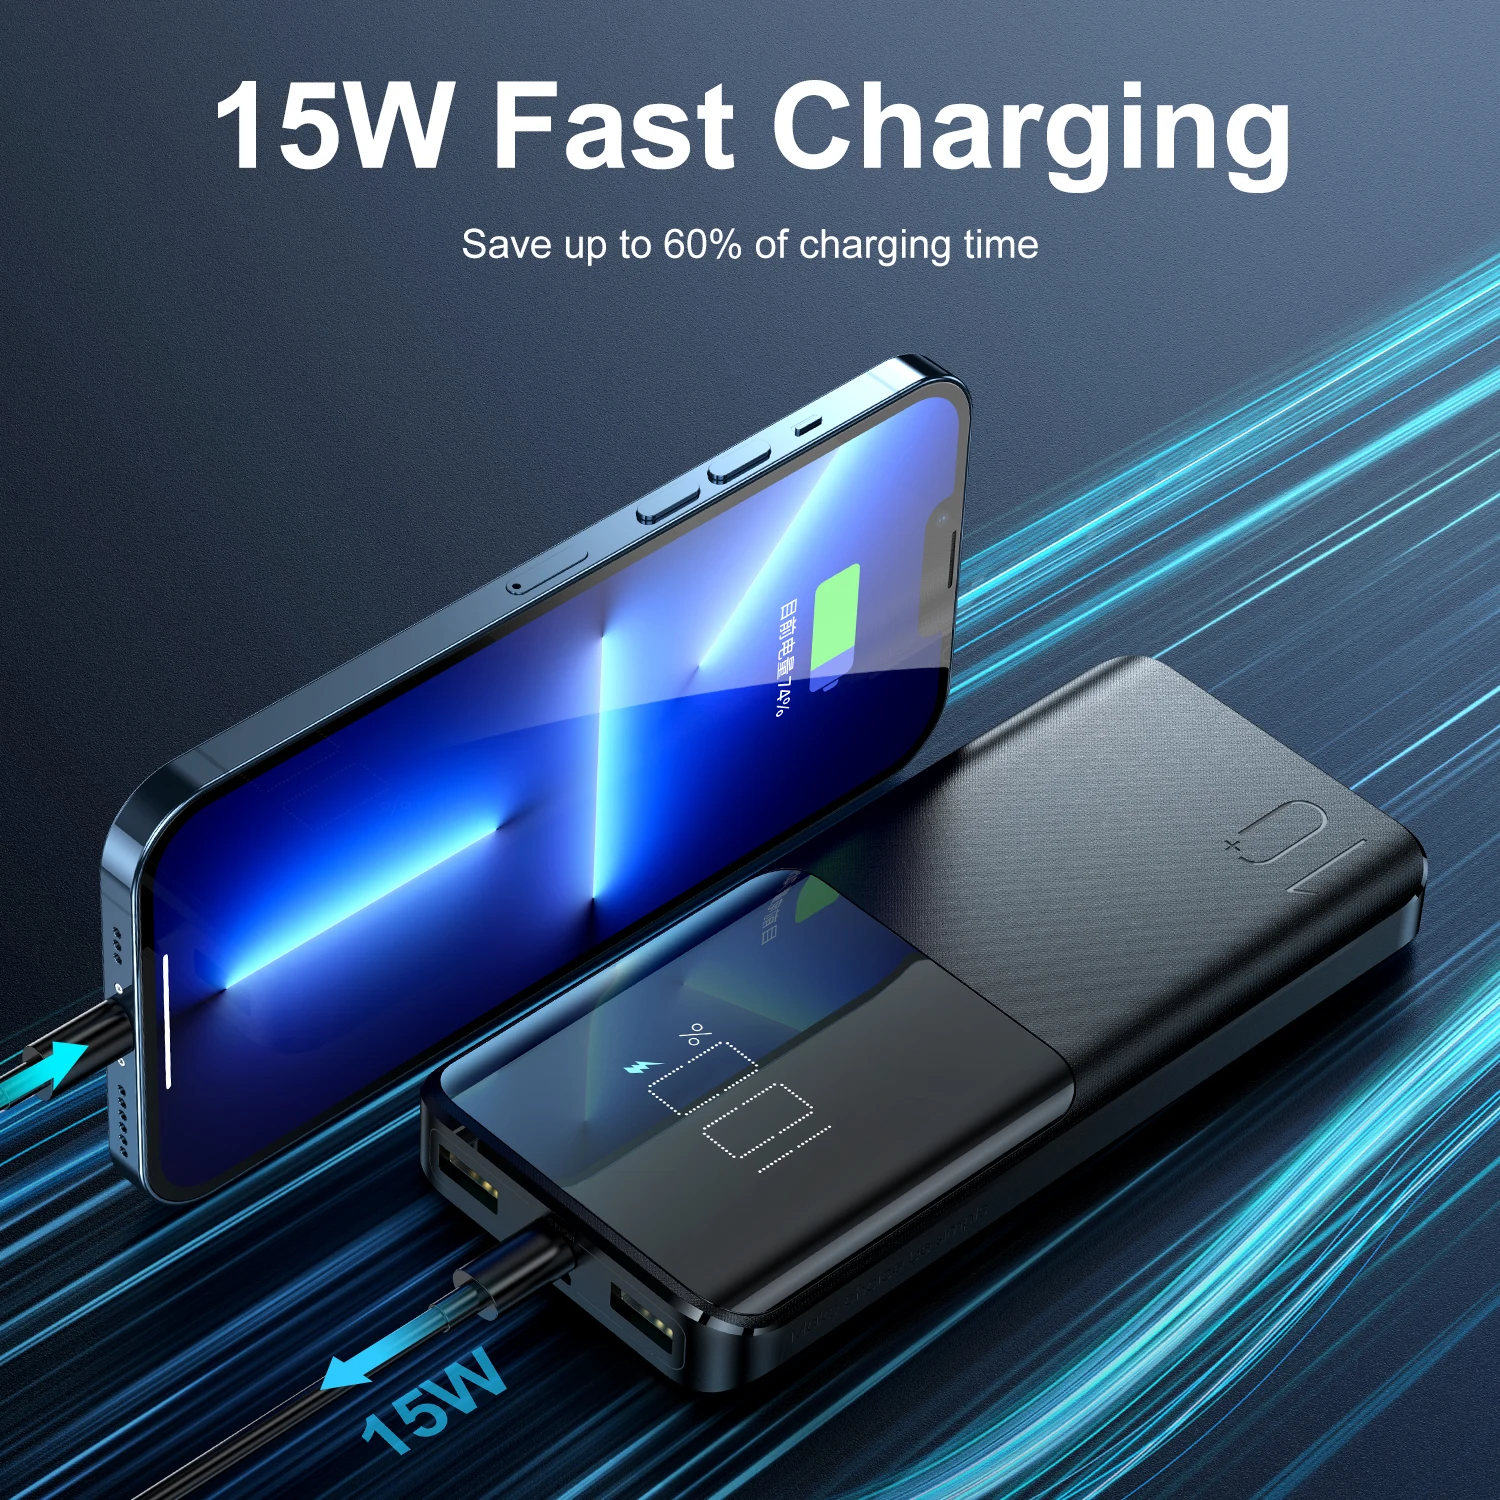 15W fast charging USB power bank real 20000mAh mobile phone battery power bank